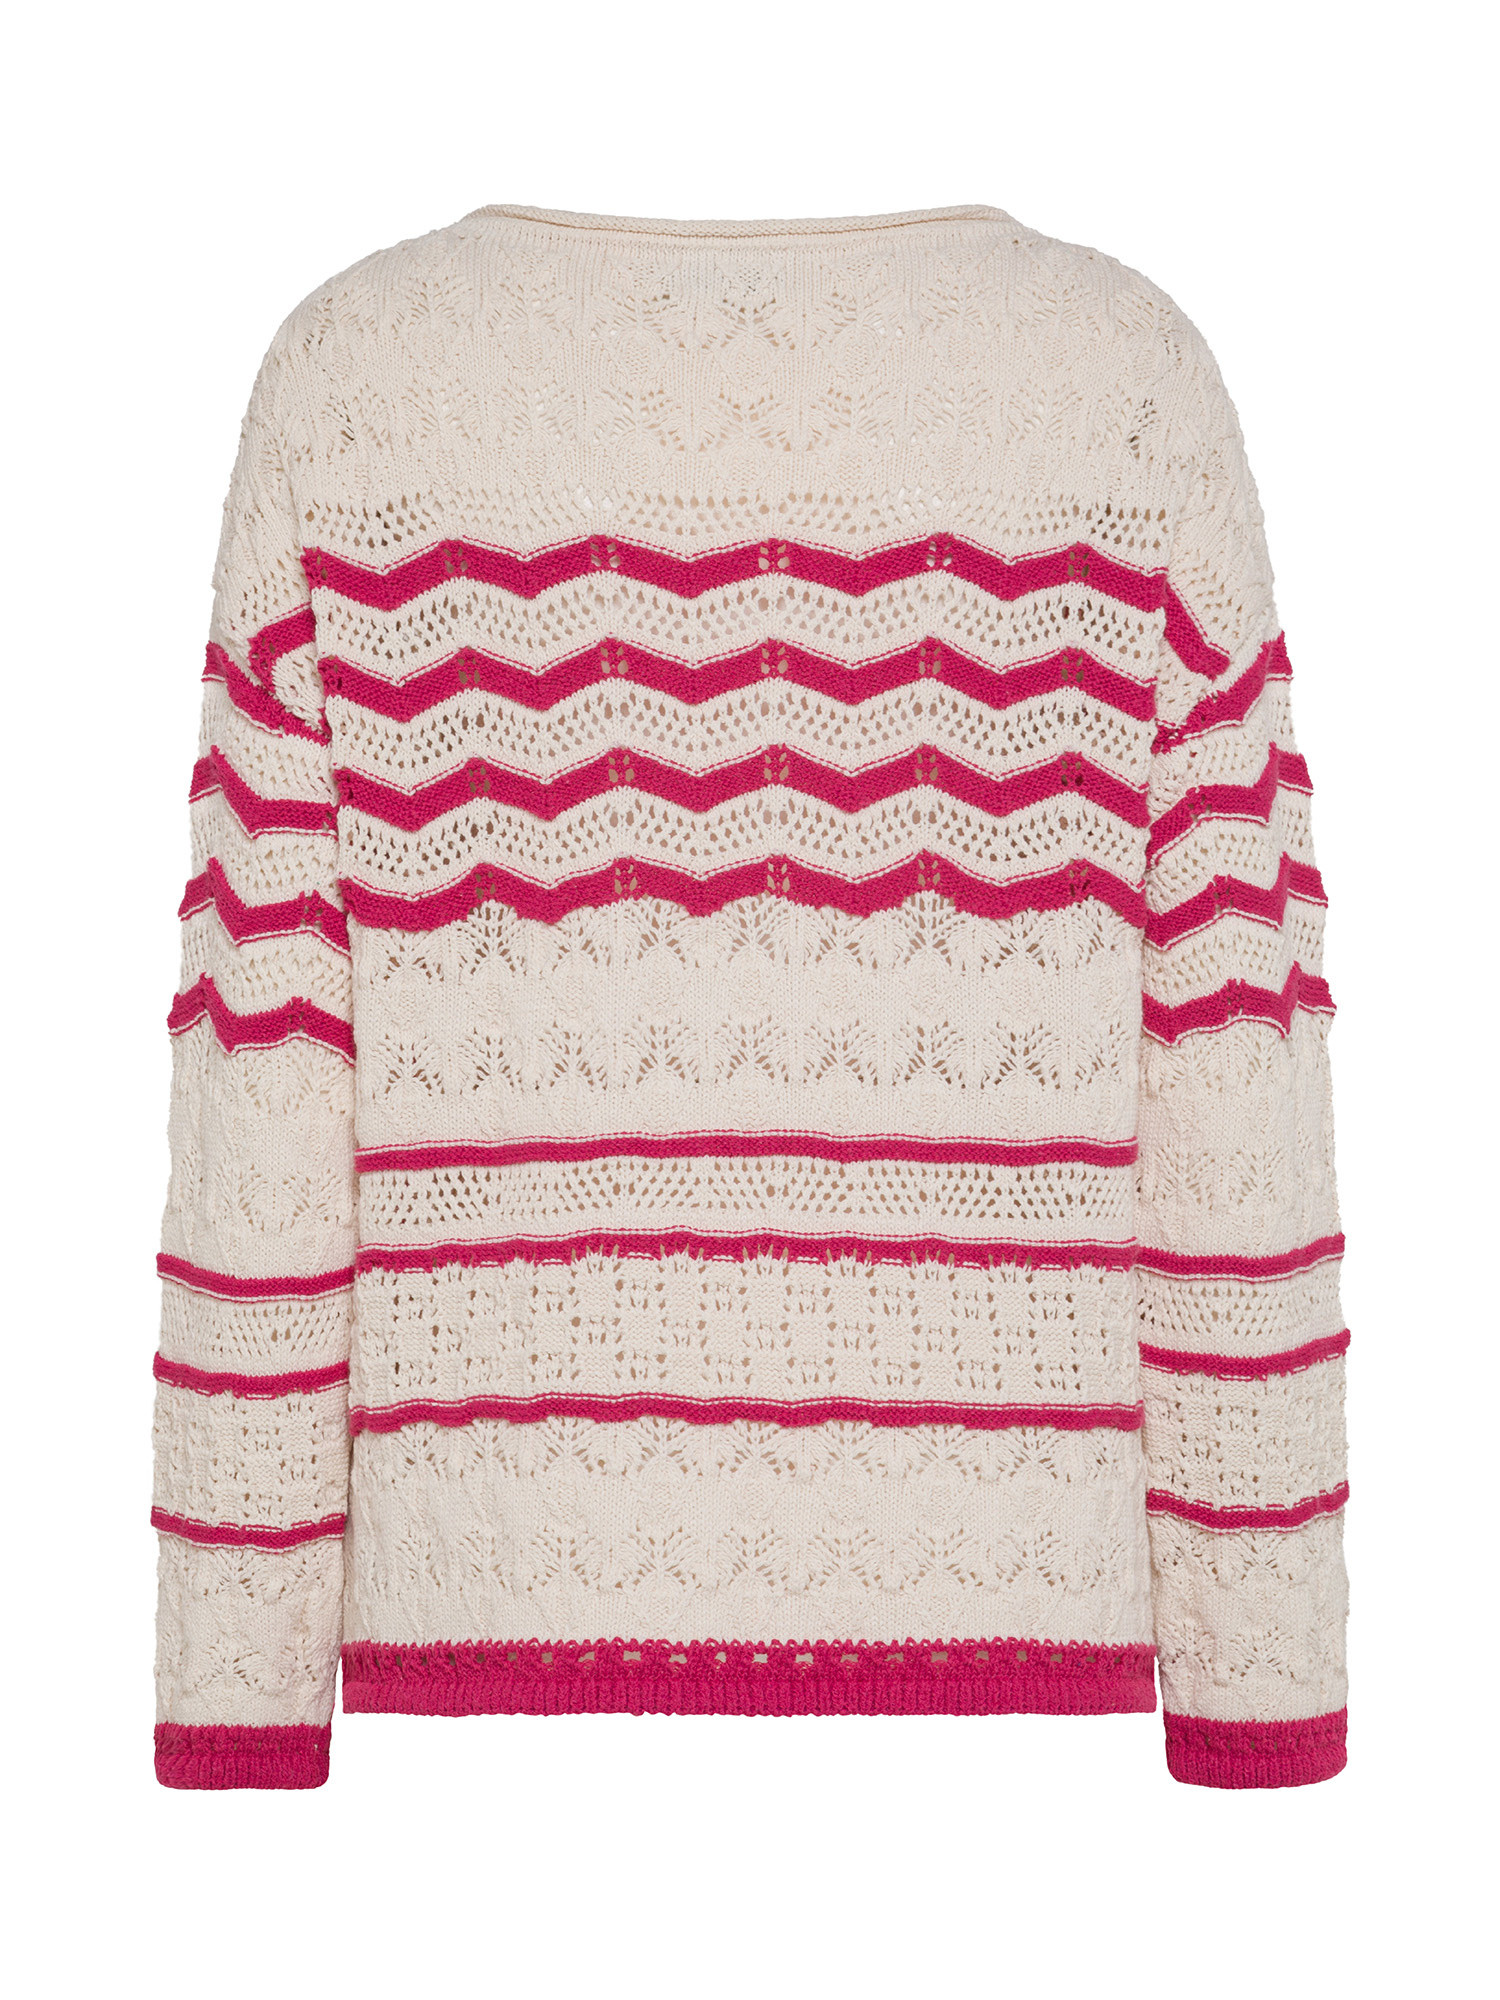 Only - Knitted pullover, Pink Fuchsia, large image number 1